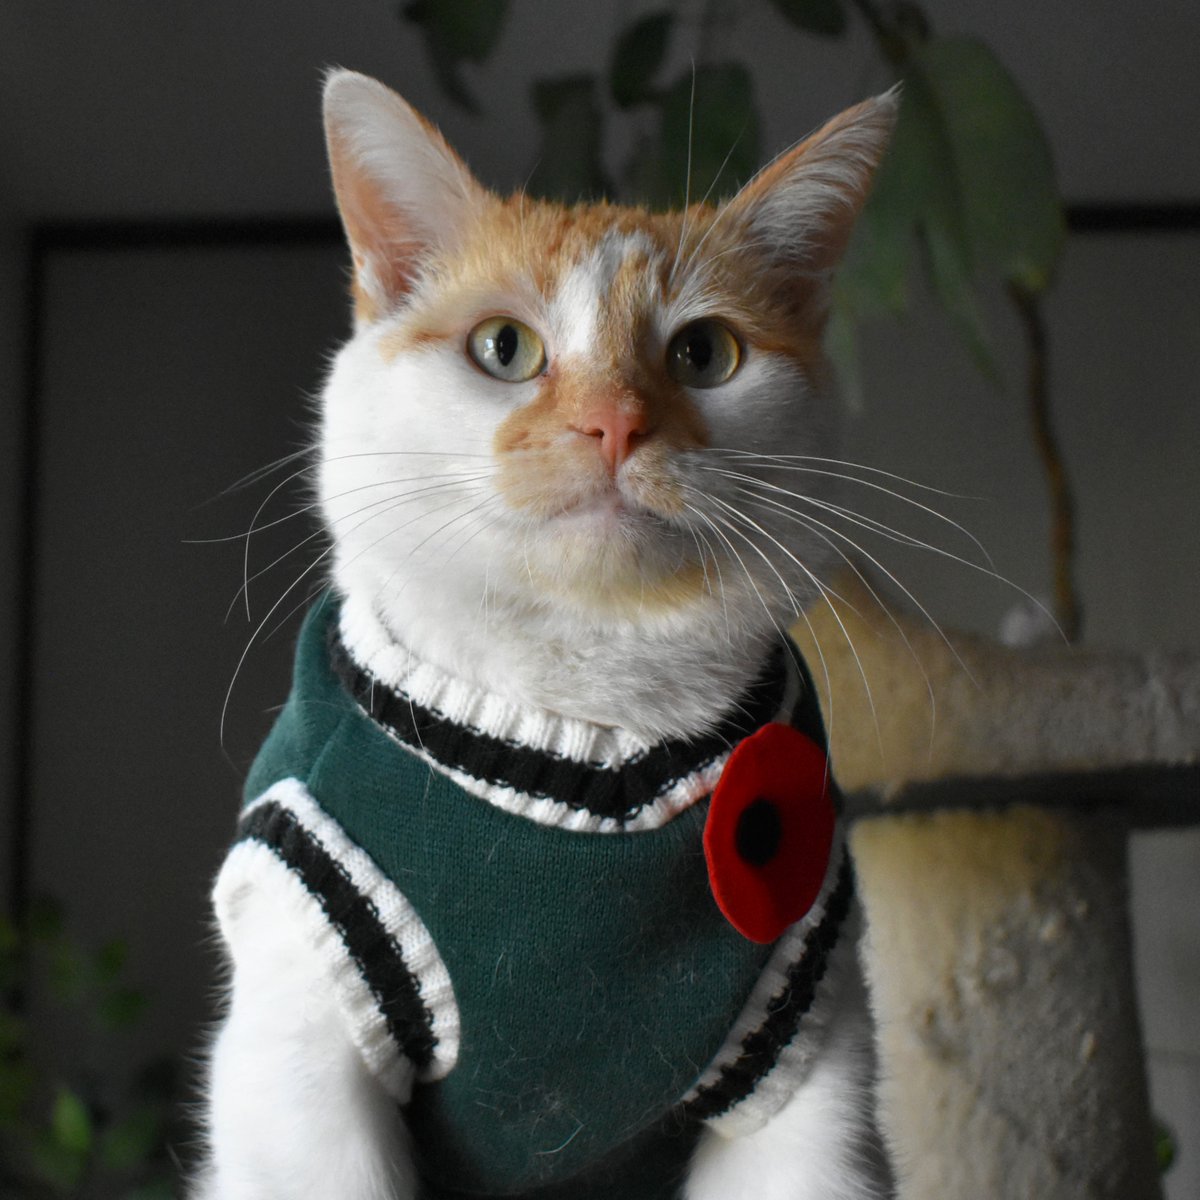 I wear a poppy on my vest
To onner doz dat fot
To show how gwateful dat I be
For all da peas dey brot

I wear a poppy on my vest
To show I not forget
Da bwavery and sakweefise
Of each and ebery vet

#CheddarPoetry #RemembranceDay #Poppy #DeezVetsBeBwaveFitersNotBumbumHolePokers